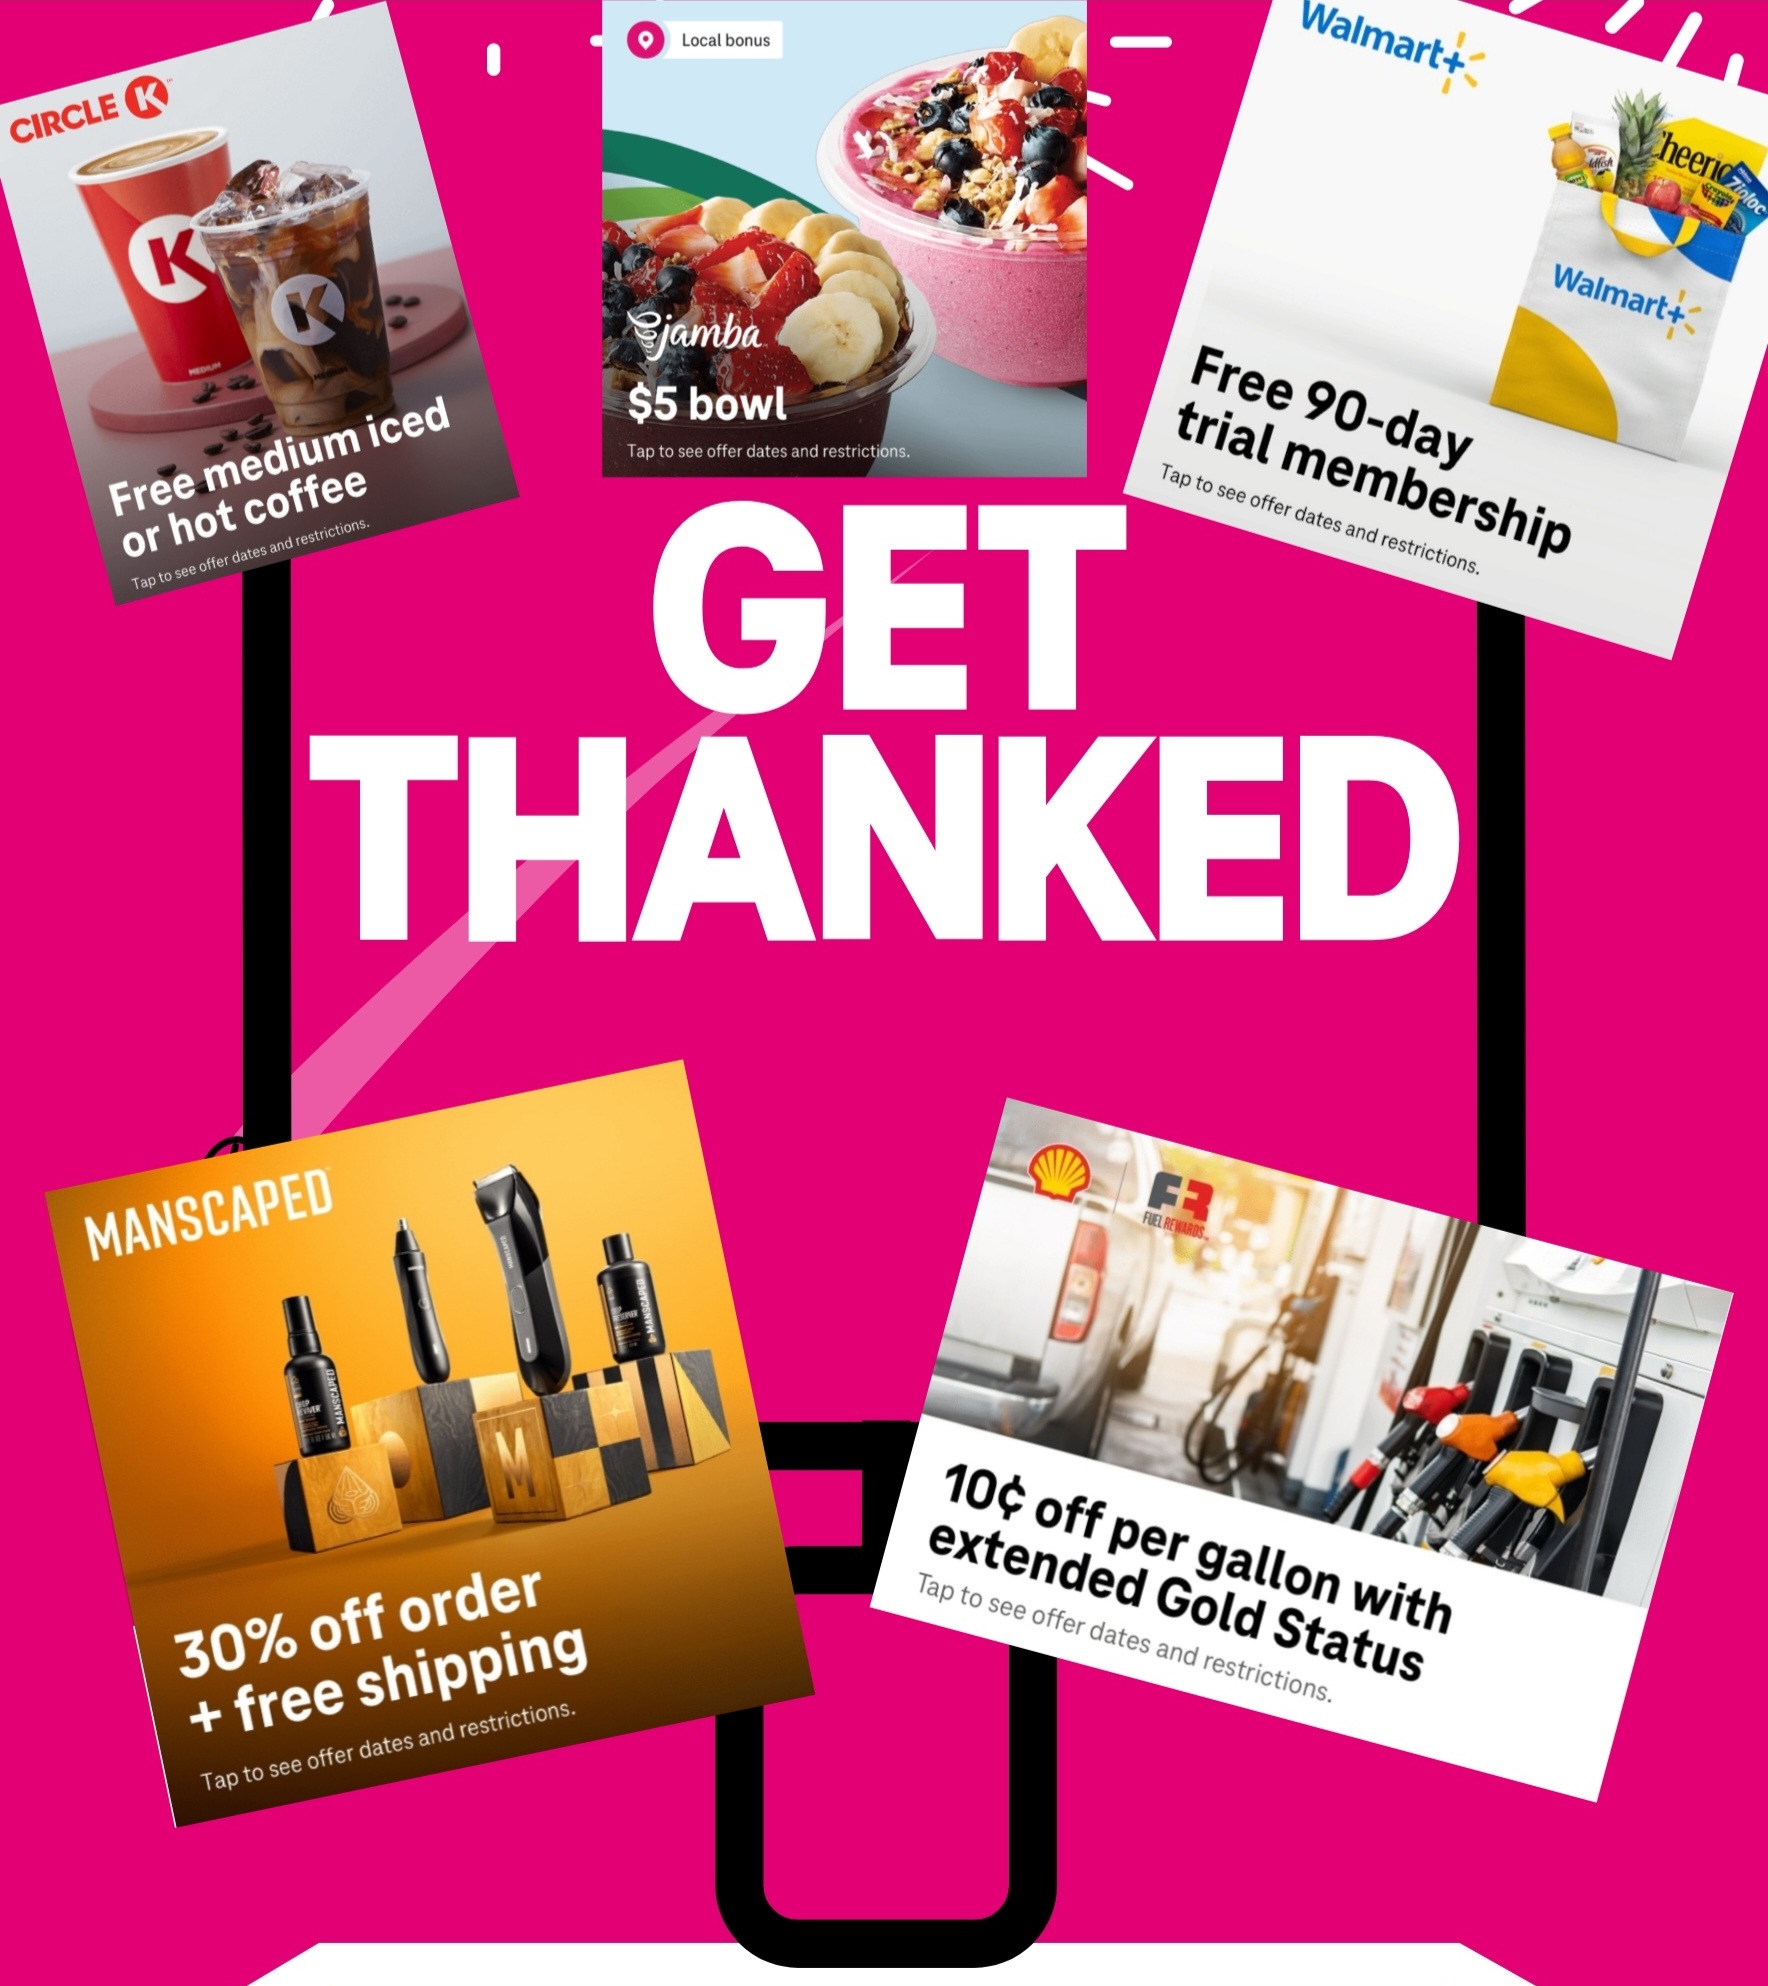 T-Mobile Customers 10/4/22: 30% off MANSCAPED order and free shipping, $5 Jamba bowl*, and 10 cents off per gallon at Shell*